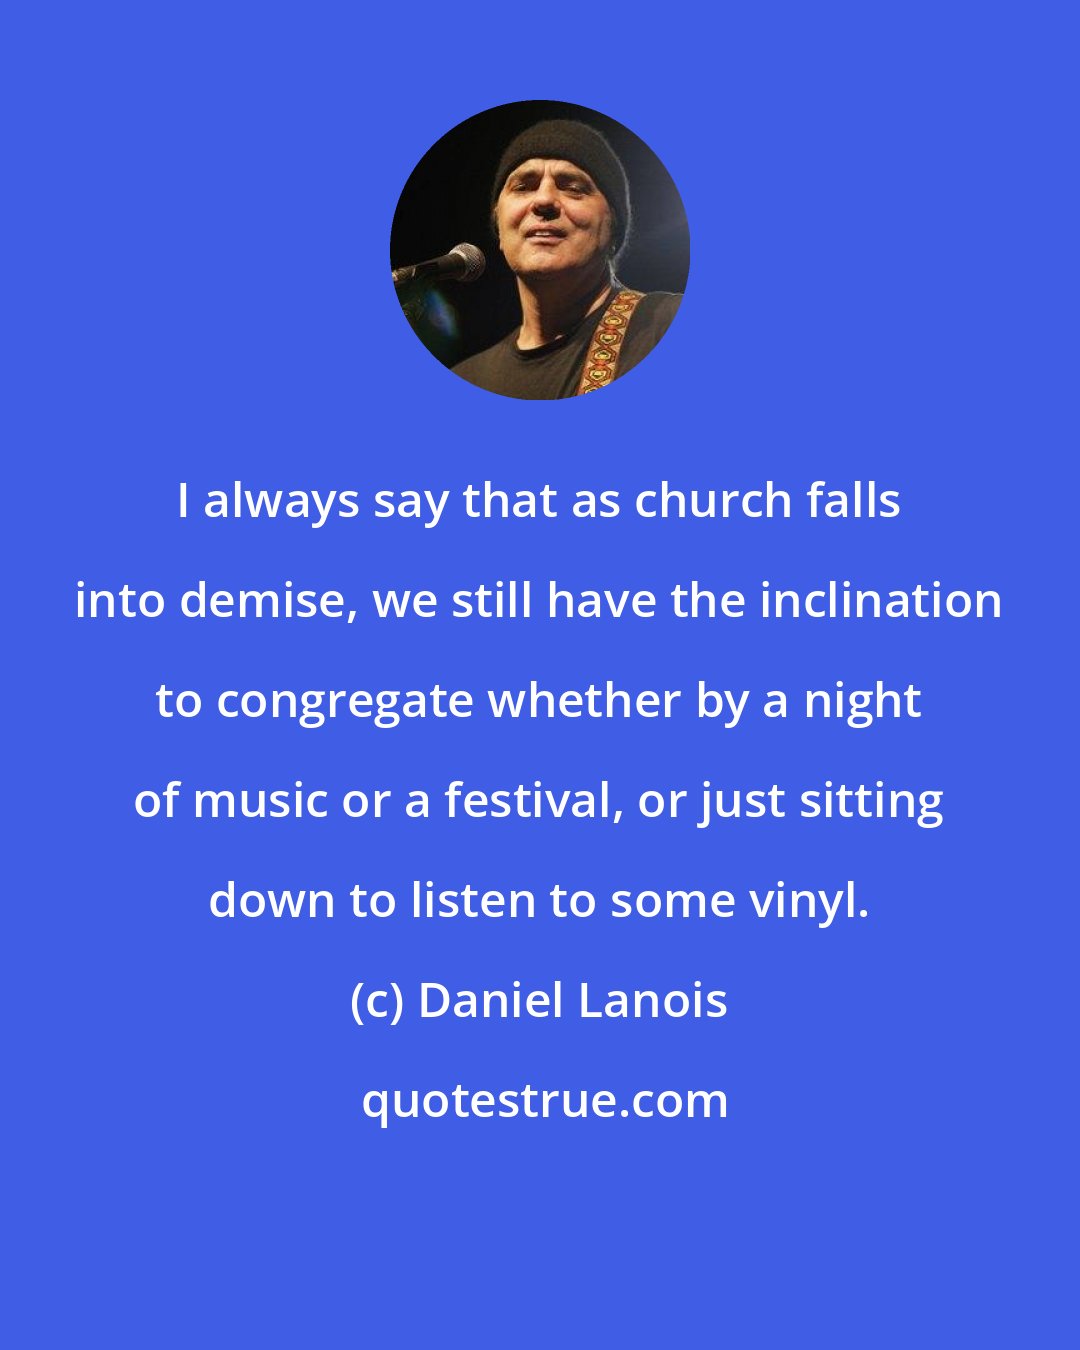 Daniel Lanois: I always say that as church falls into demise, we still have the inclination to congregate whether by a night of music or a festival, or just sitting down to listen to some vinyl.